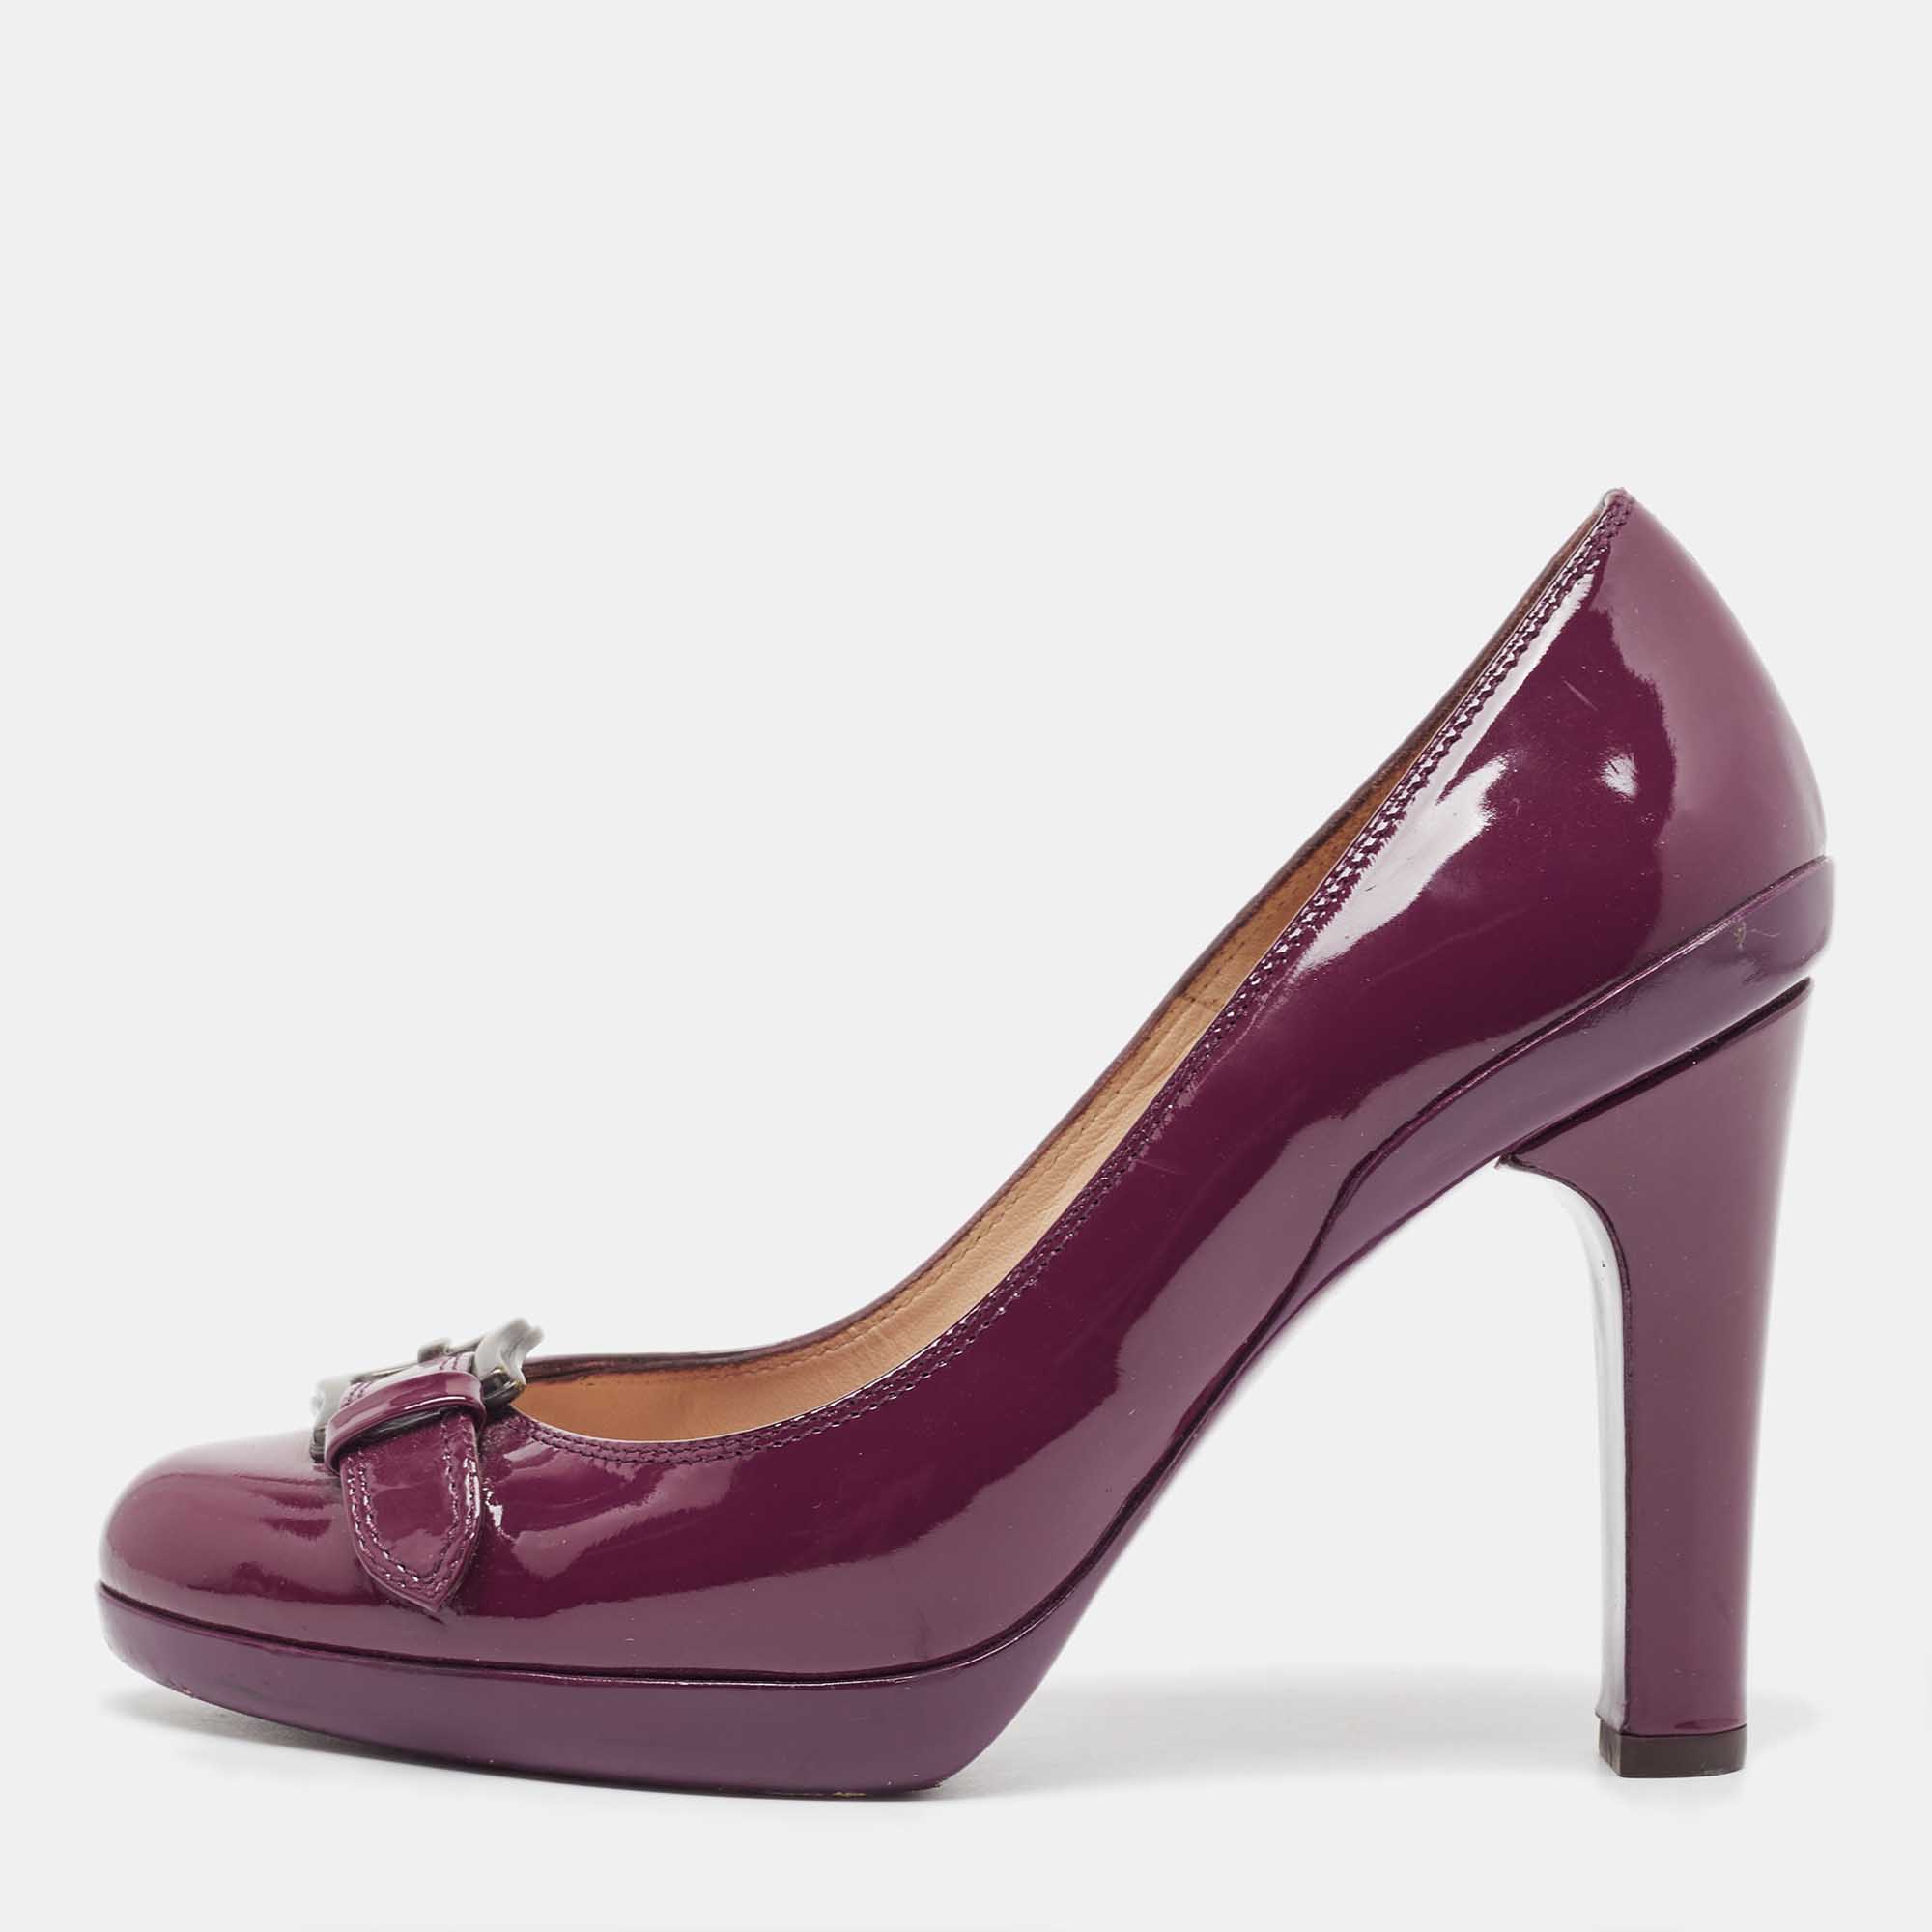 Pre-owned Fendi Burgundy Patent Leather Buckle Detail Round Toe Pumps Size 36.5